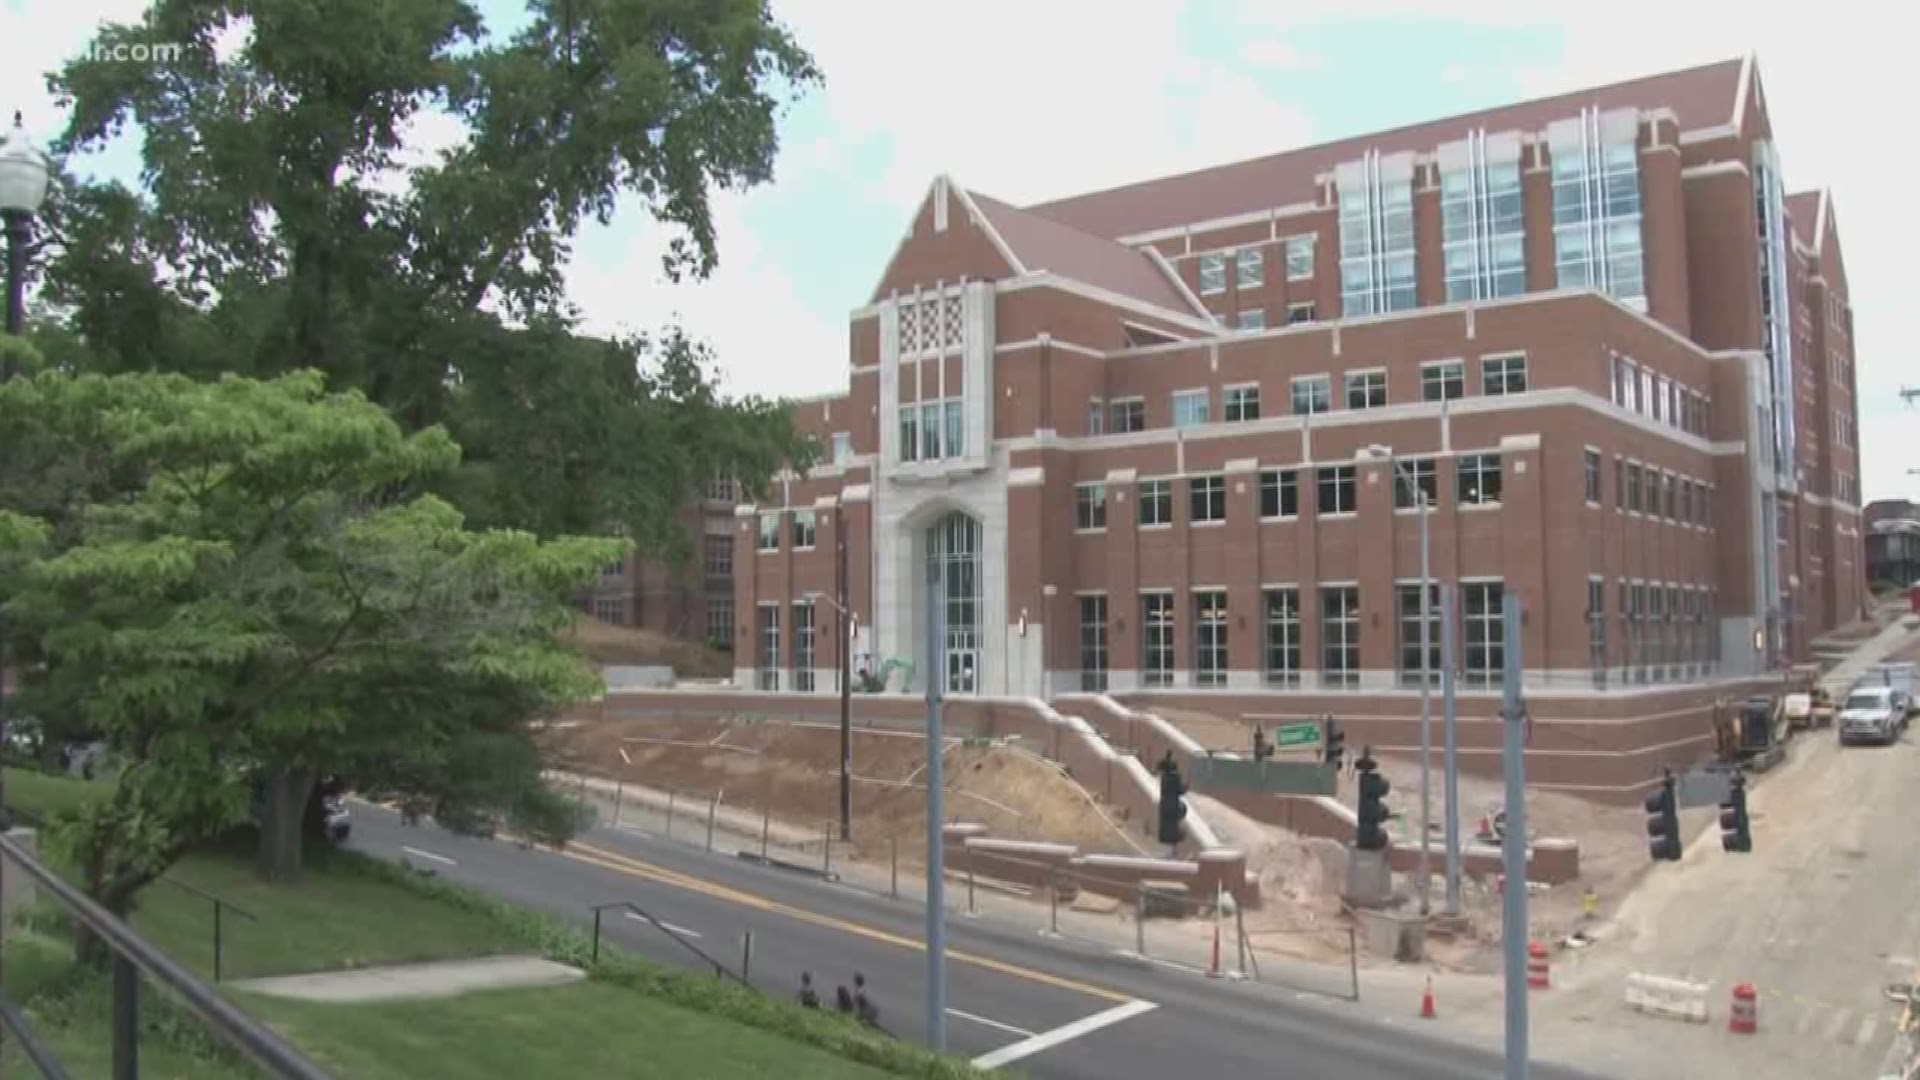 Construction at the University of Tennessee is speeding up for the summer.